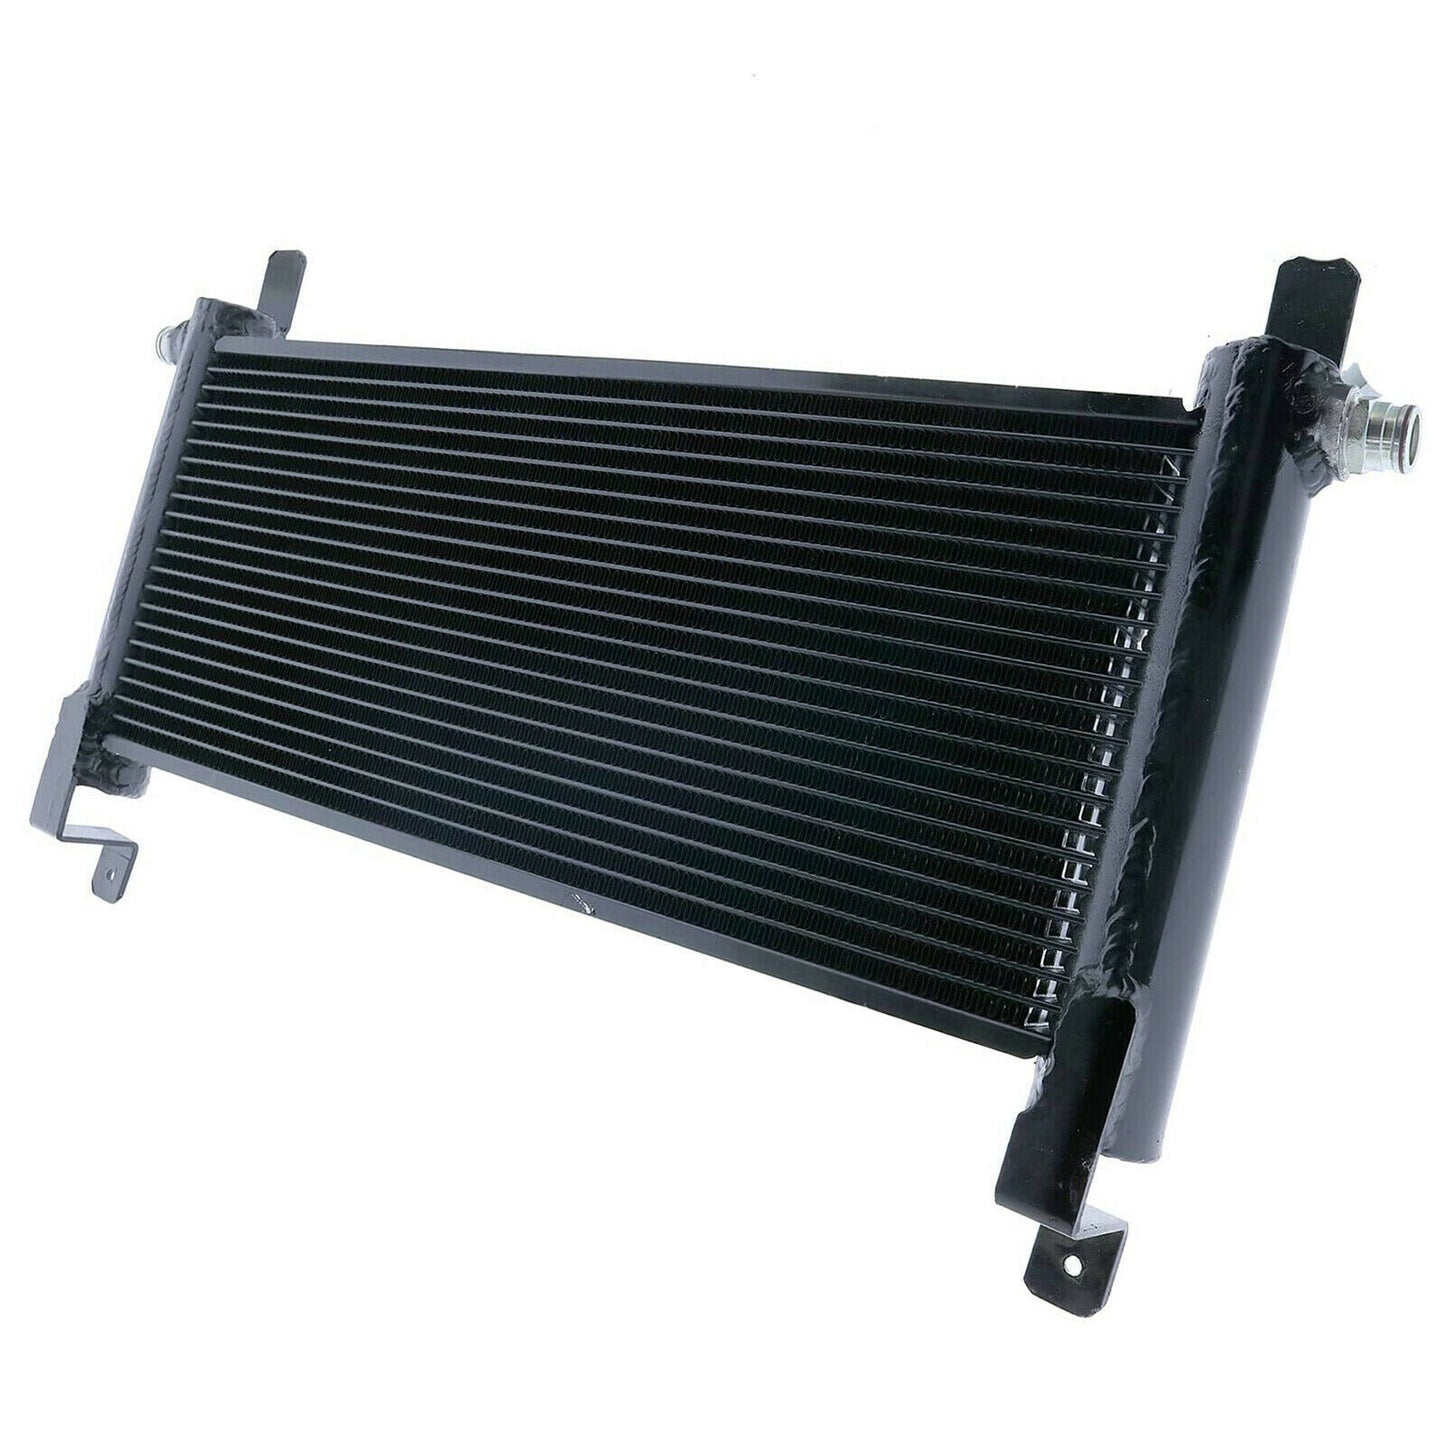 6674150 Hydraulic Oil Cooler Compatible With Bobcat 751 753 763 773 7753 Skid Steer